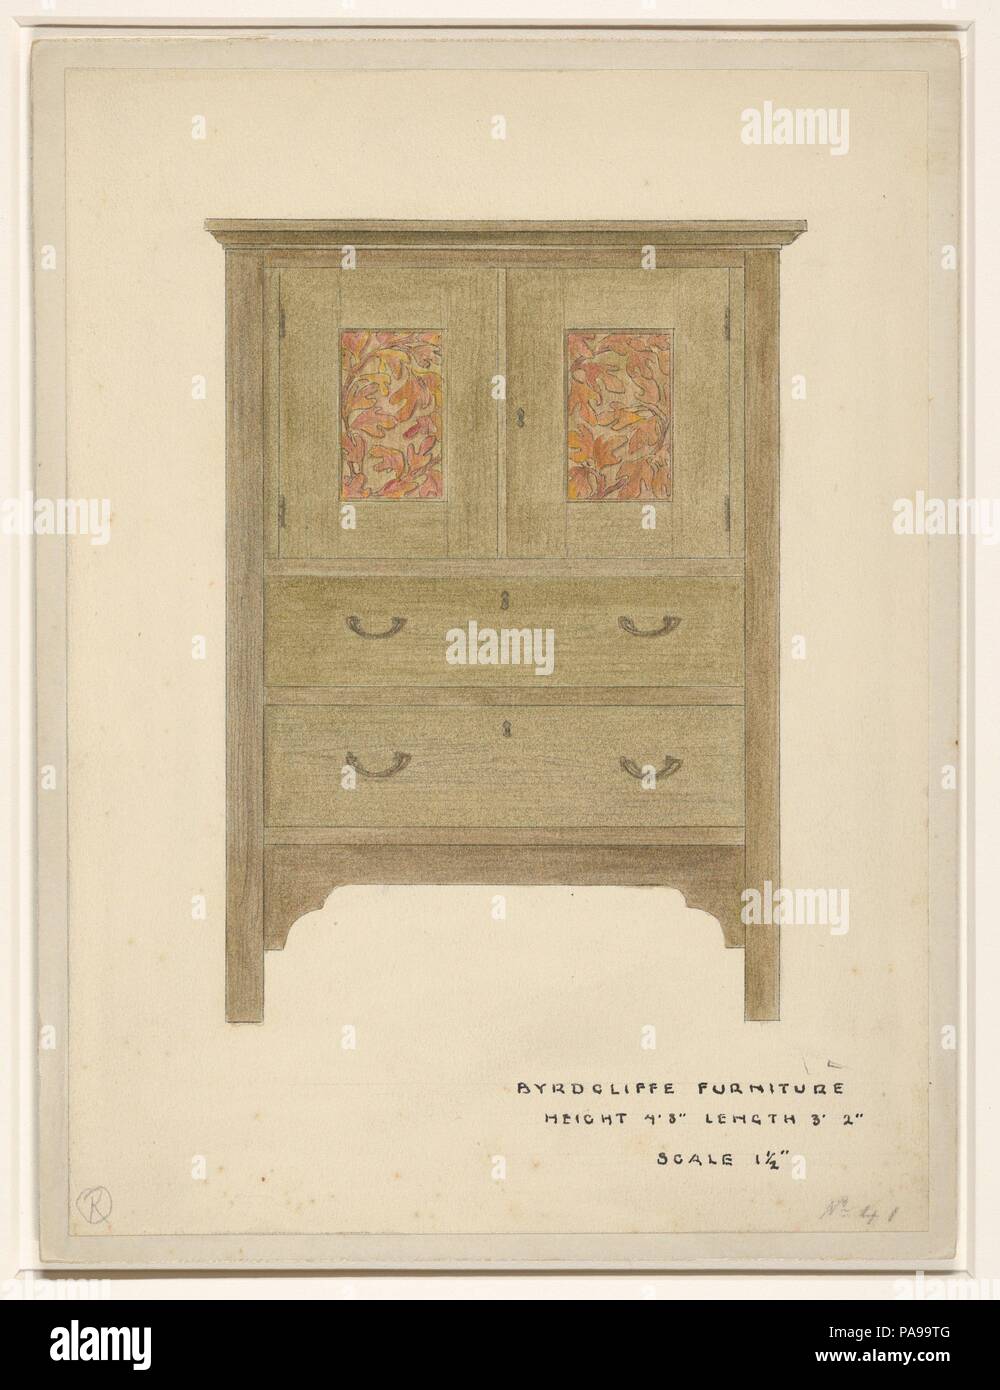 Sassafras Linen Press. Artist: Byrdcliffe Arts and Crafts Colony (American, 1902-1915); attrib. to Ralph Radcliffe Whitehead (American (born England), Yorkshire 1854-1929 Santa Barbara, California). Dimensions: sheet: 10 x 7 3/8 in. (25.4 x 18.8 cm). Date: 1904.  Inspired by the ideas of the Arts and Crafts Movement, the Englishman Ralph Whitehead, who had studied under John Ruskin at Oxford, sought to establish his own ideal, self-sustaining art community in the United States. After a failed experiment in Oregon, in 1902 he founded the Byrdcliffe Arts and Crafts Colony right outside Woodstock Stock Photo